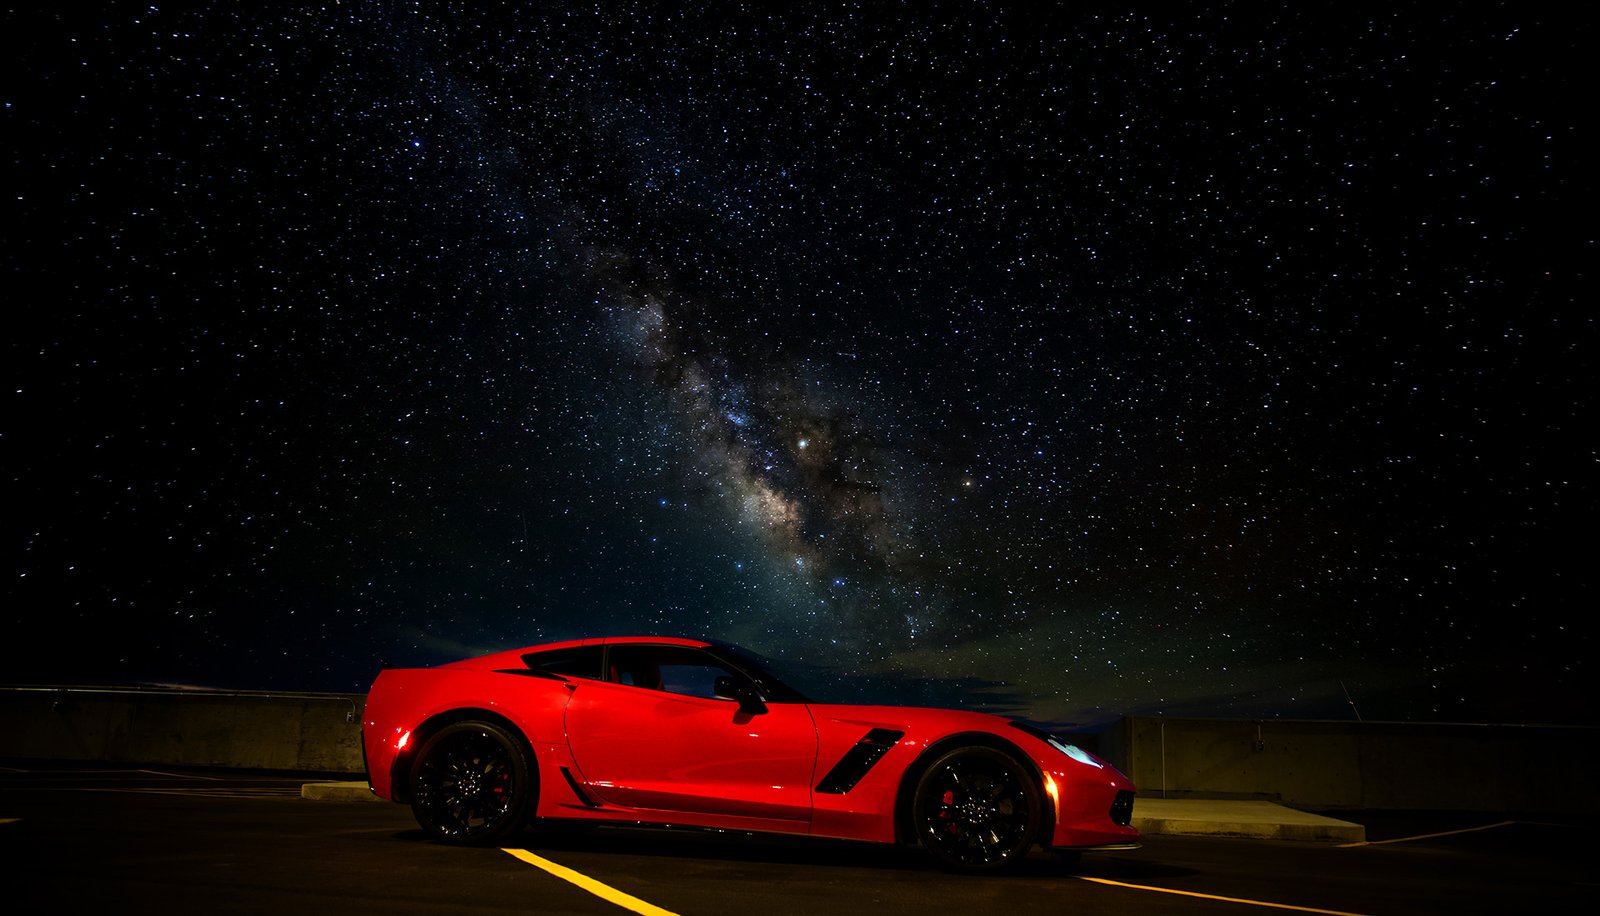 Chevy Corvette Z06 on a parkade rooftop at night with Milky Way visible